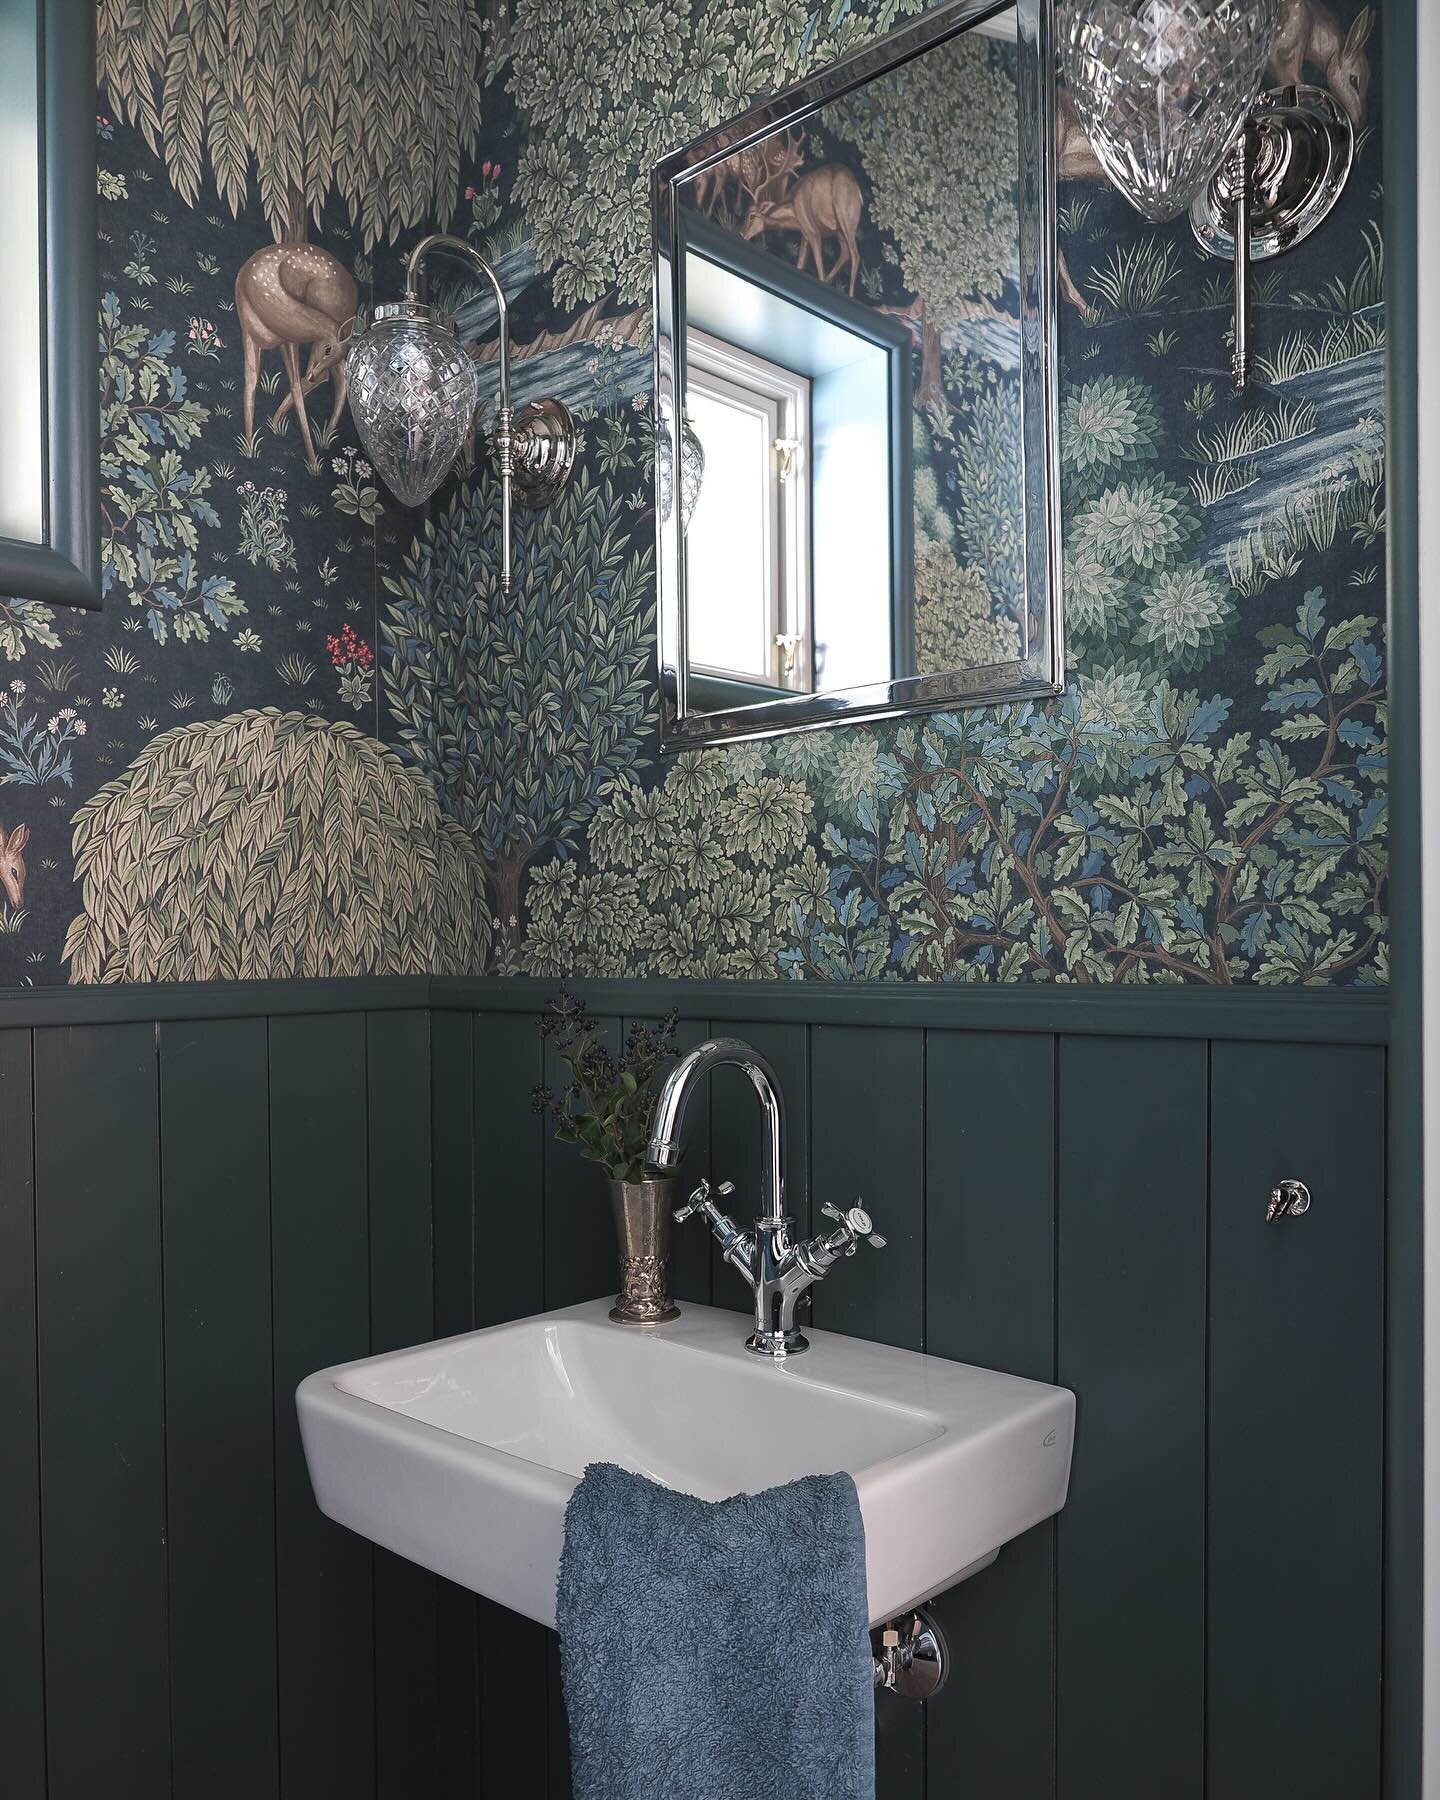 VMID PROJECT &bull; Small rooms - large impact!
⠀⠀⠀⠀⠀⠀⠀⠀⠀
I love using small rooms like guest bathrooms to create something special. Like the guest bathroom of my Classic Fairytale project where an enchanting tapestry inspired wallpaper sets the scen